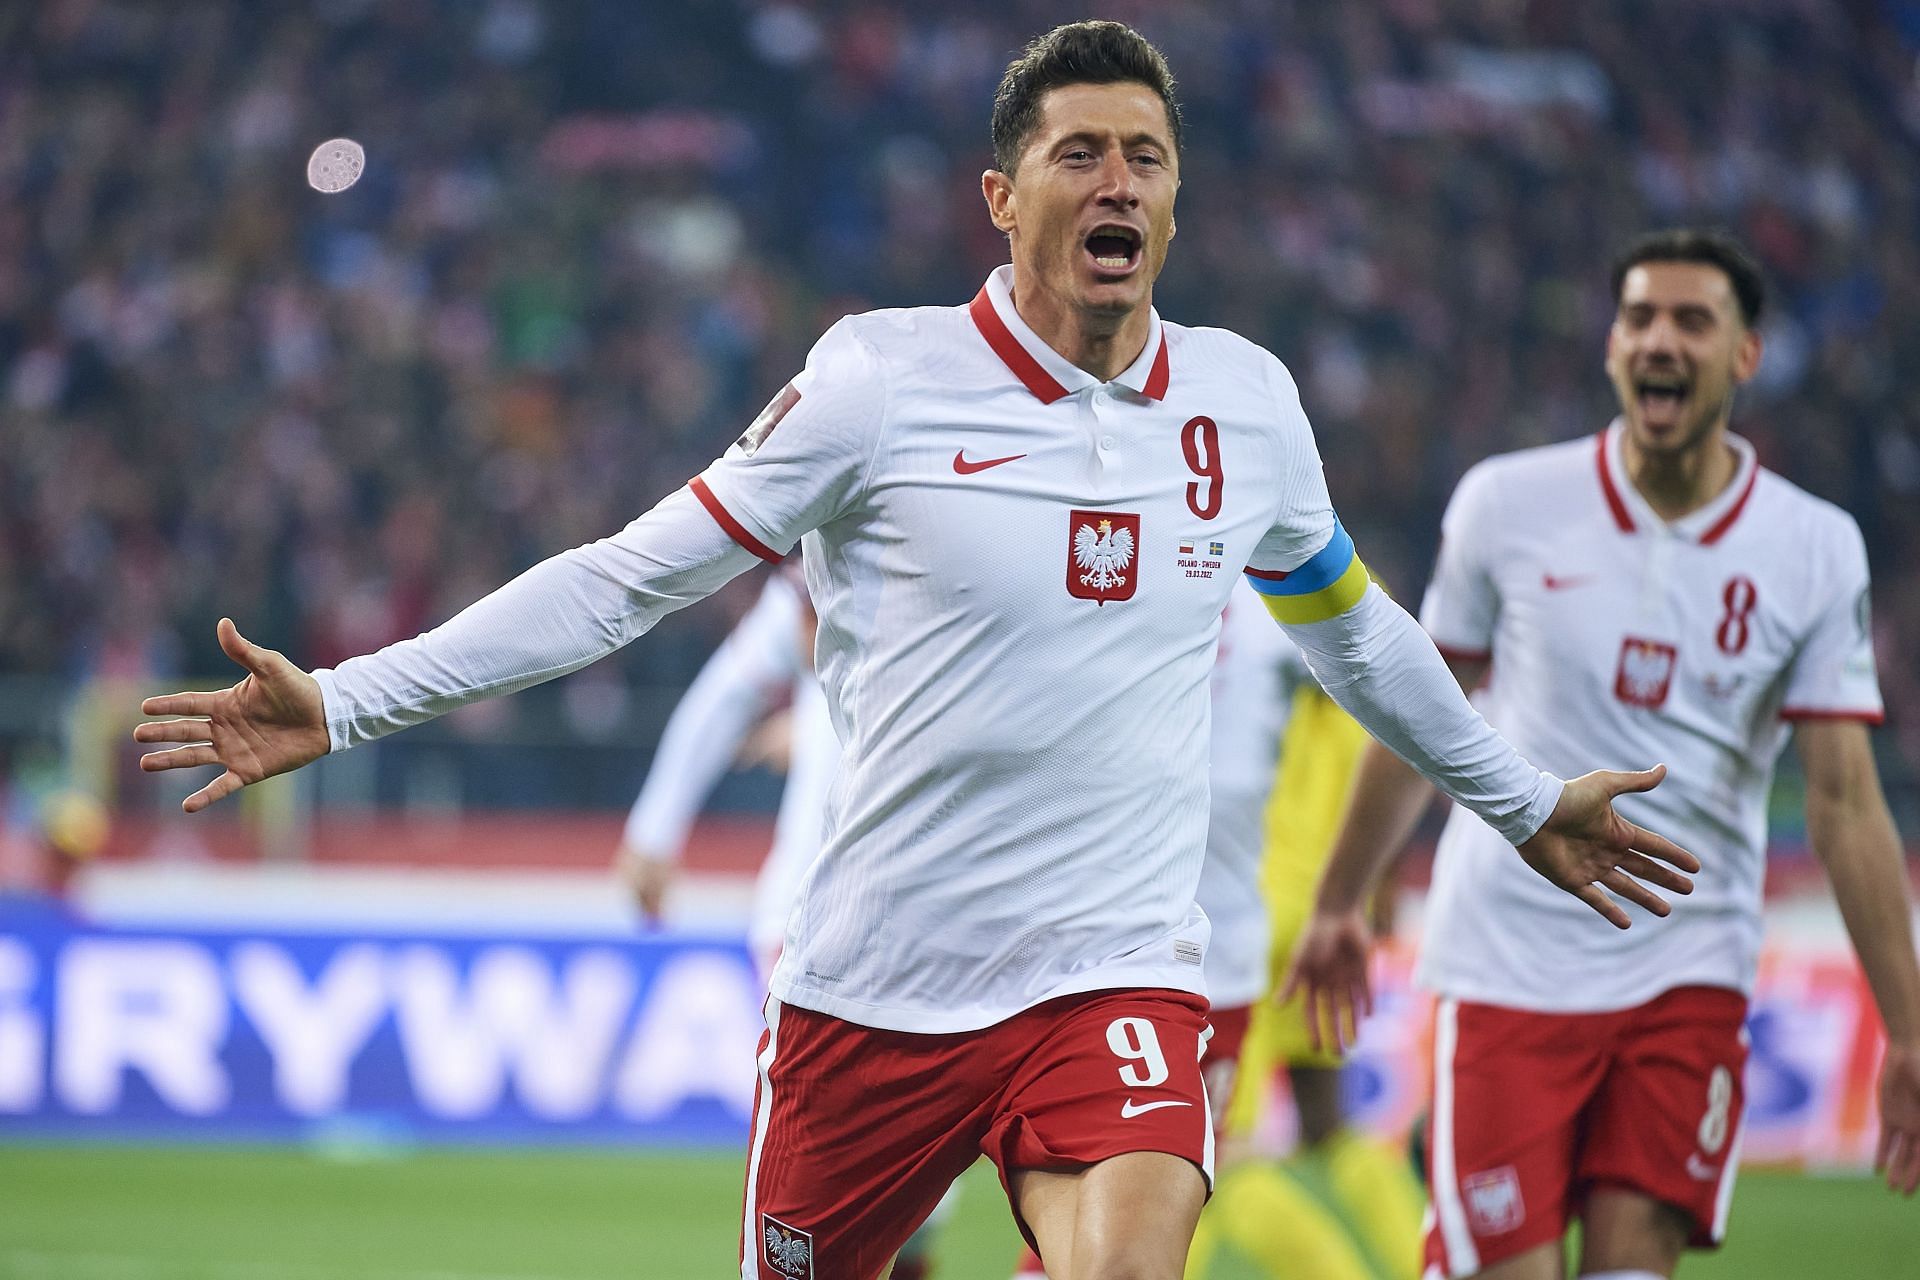 Poland will host Wales on Wednesday - 2022 UEFA Nations League